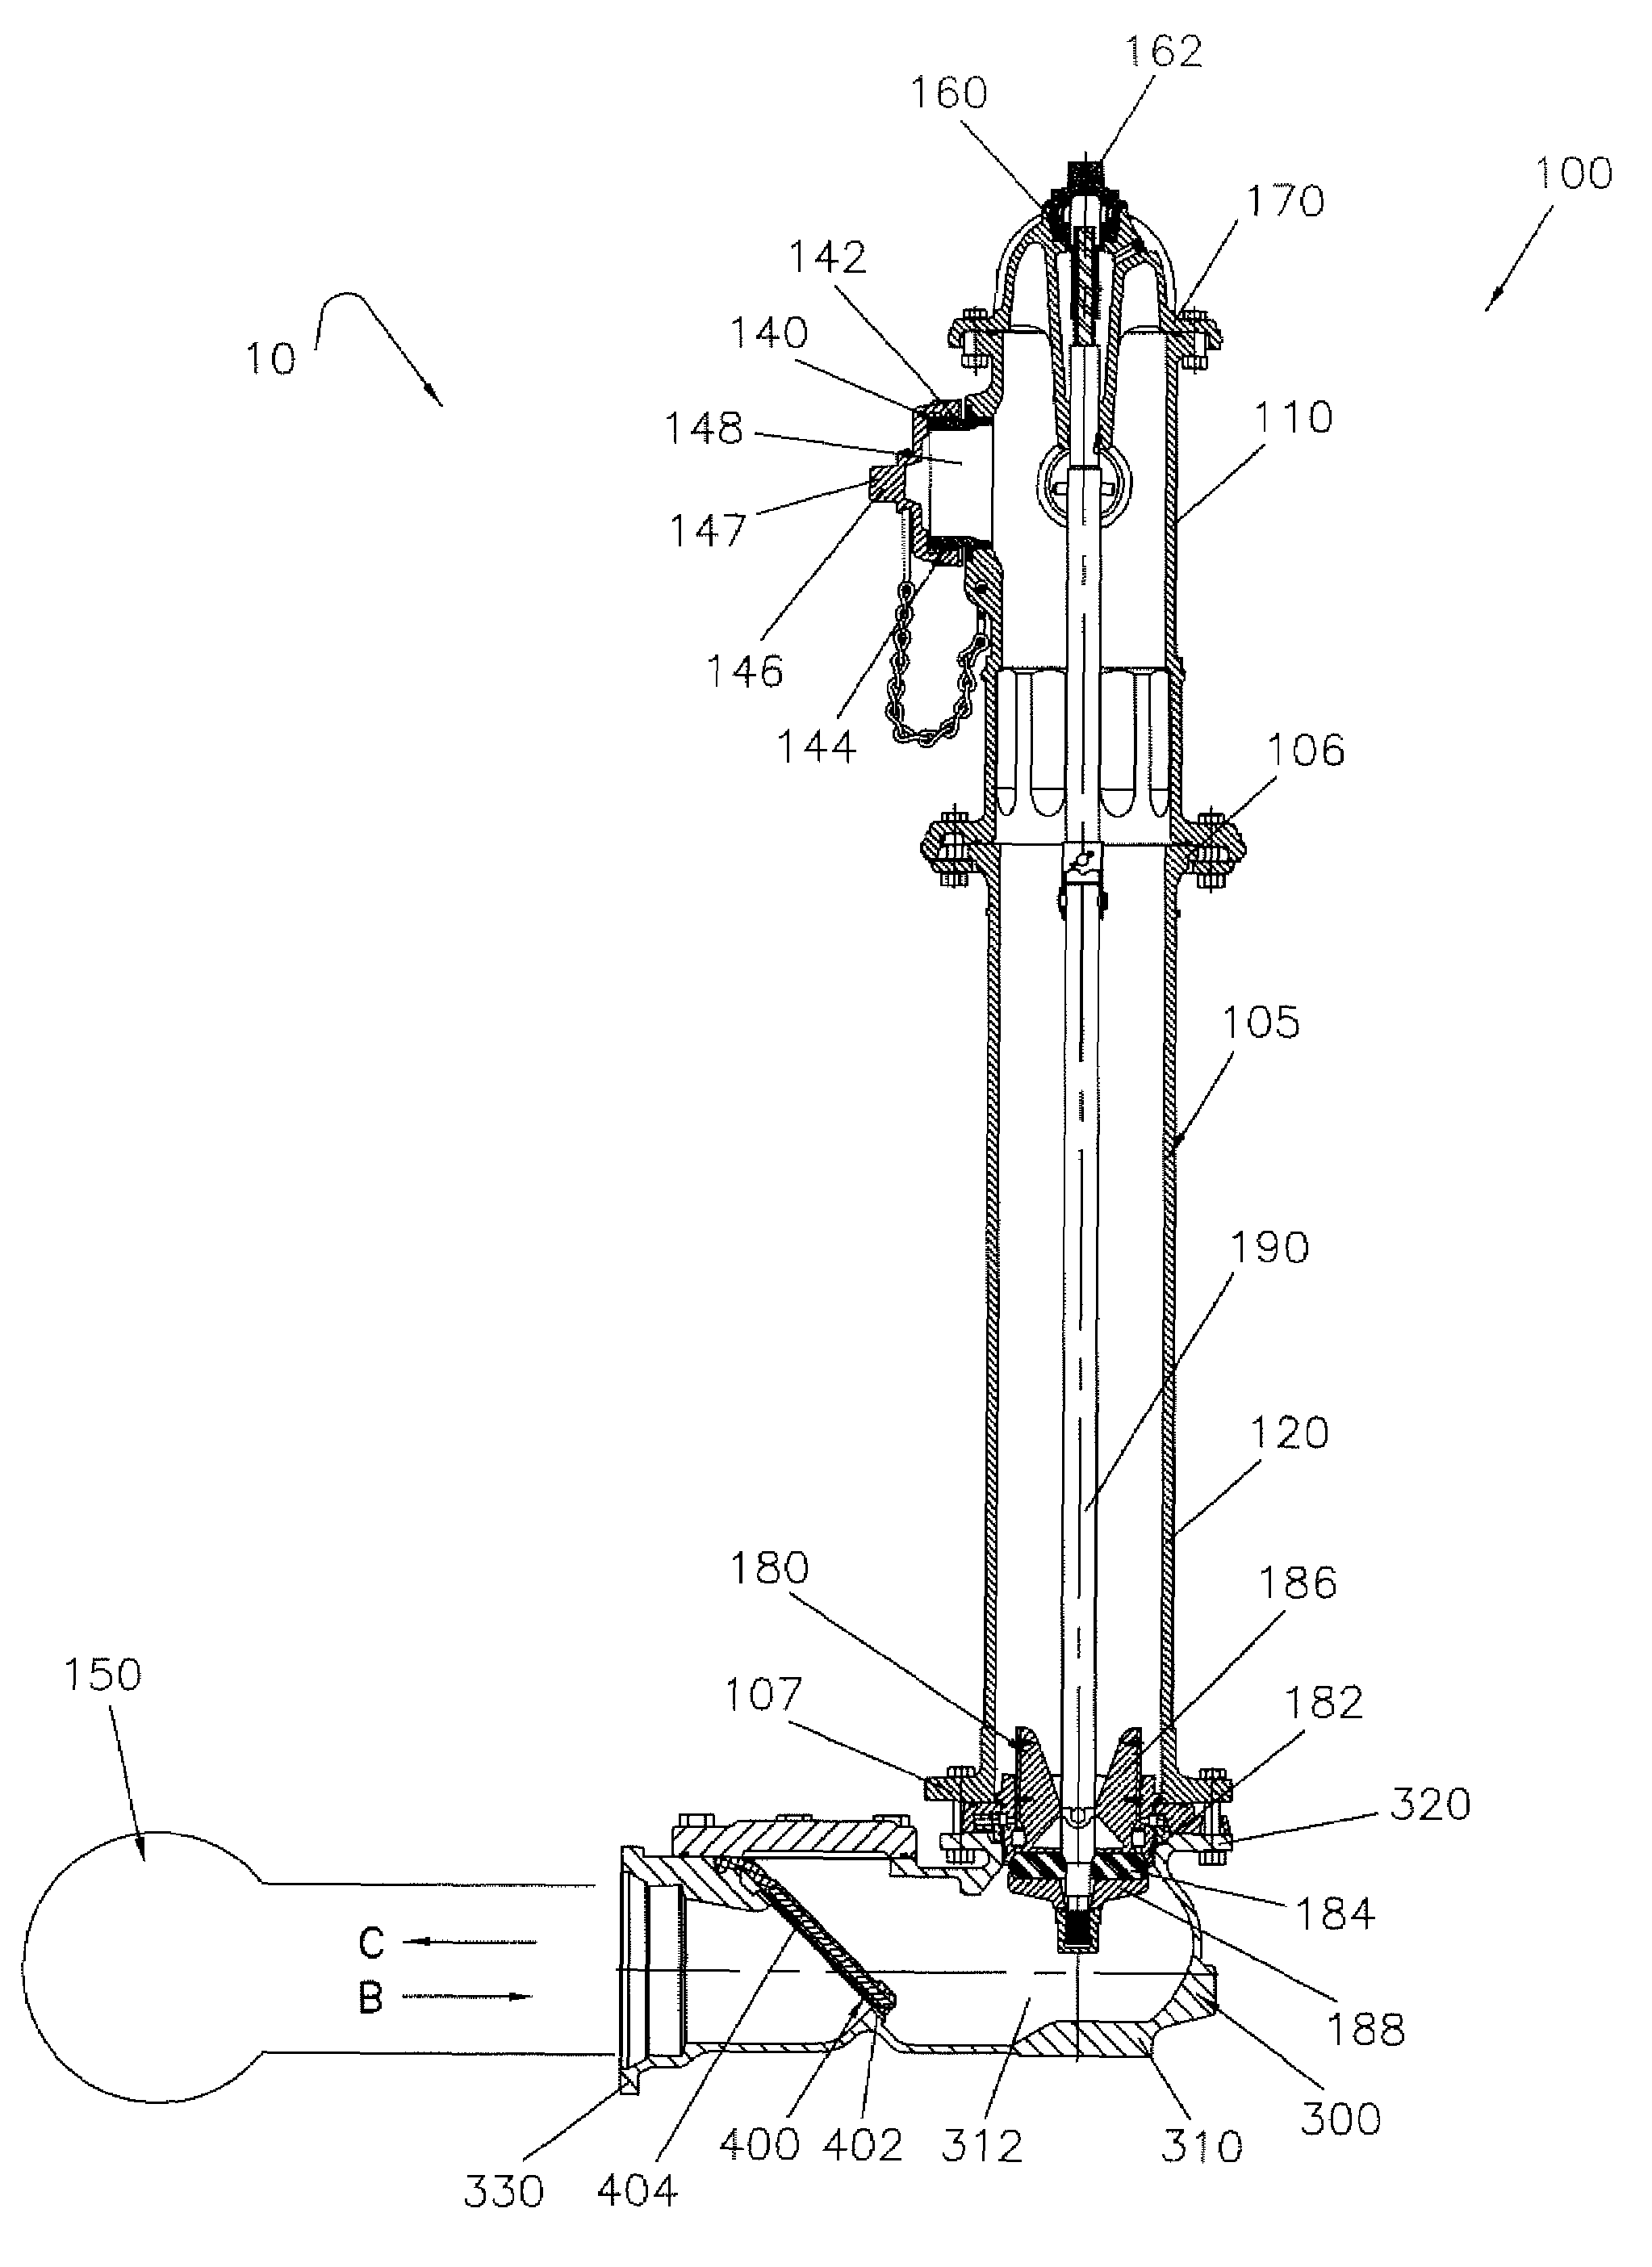 Hydrant shoe with backflow prevention assembly